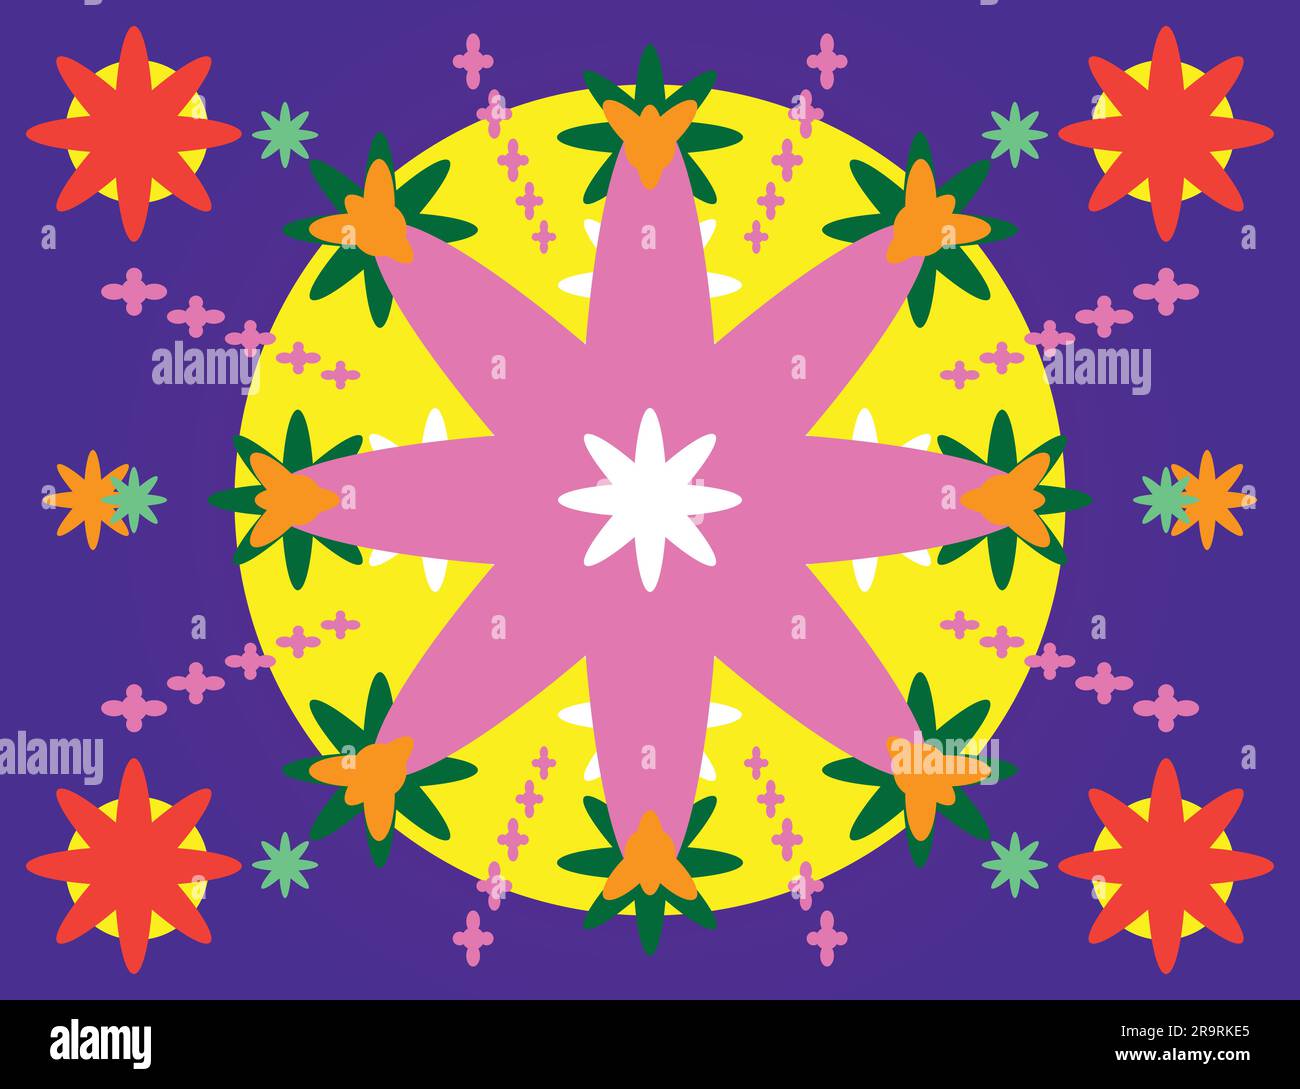 hippie graphic elements decorative flower blotter geometric floral ornament trippy psychedelic 80s purple pink yellow red, corona pop icon symbol Stock Vector